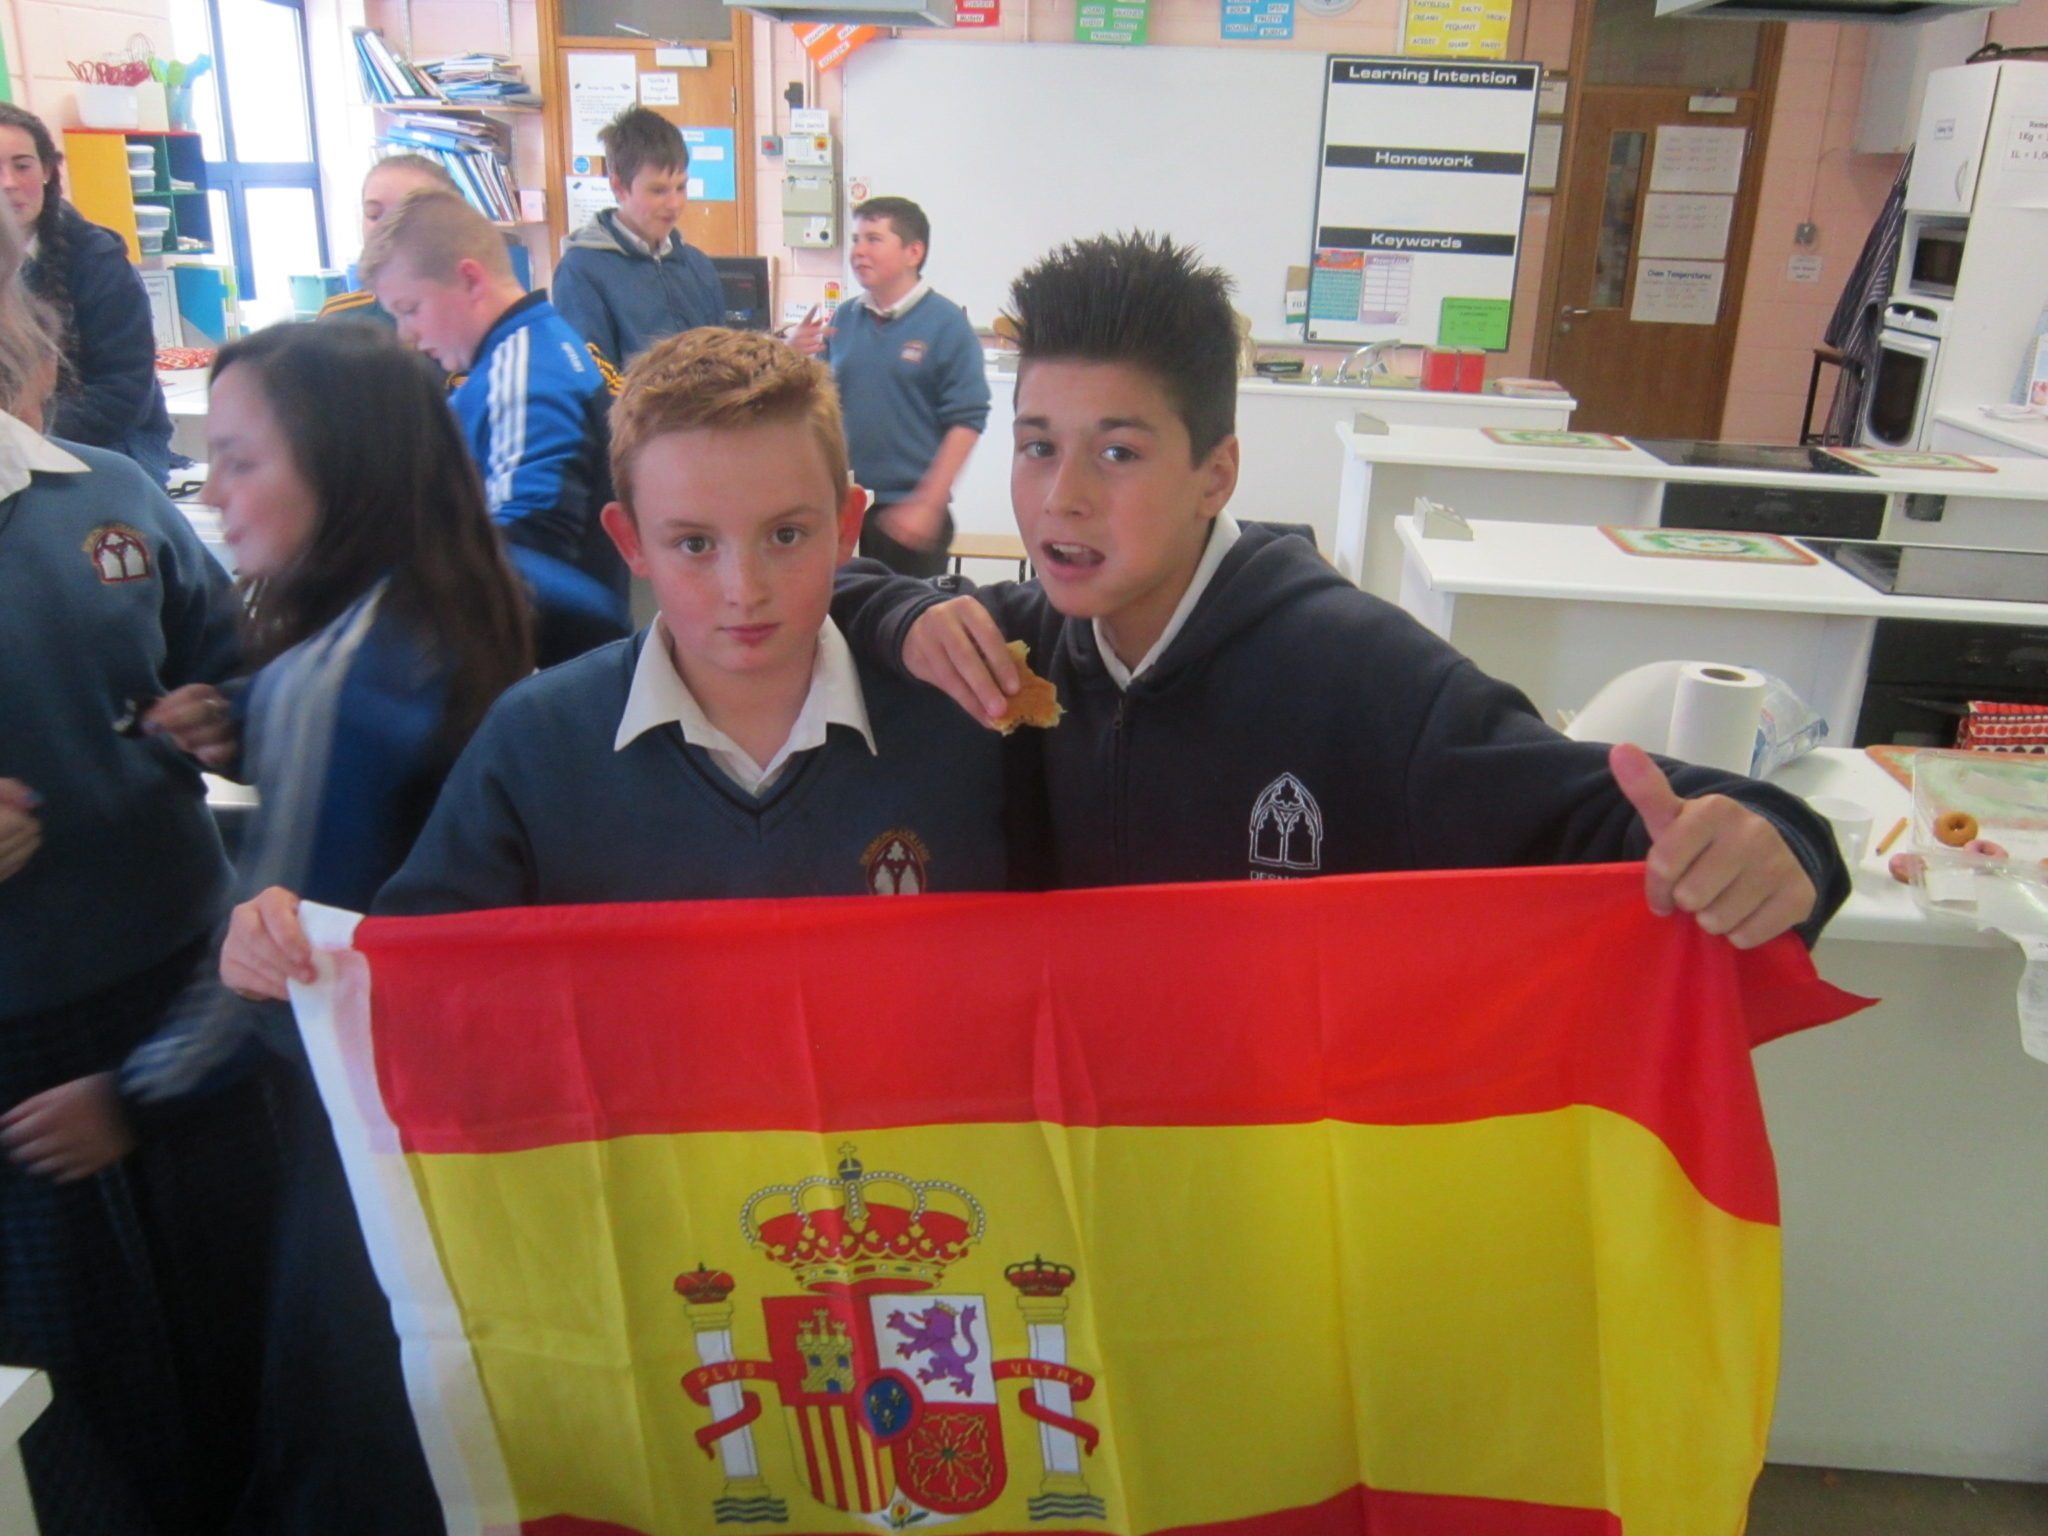 Desmond College Students AJ Donovan and Konrad Papierowski are part of the Desmond College first year students who are learning about Spanish Culture